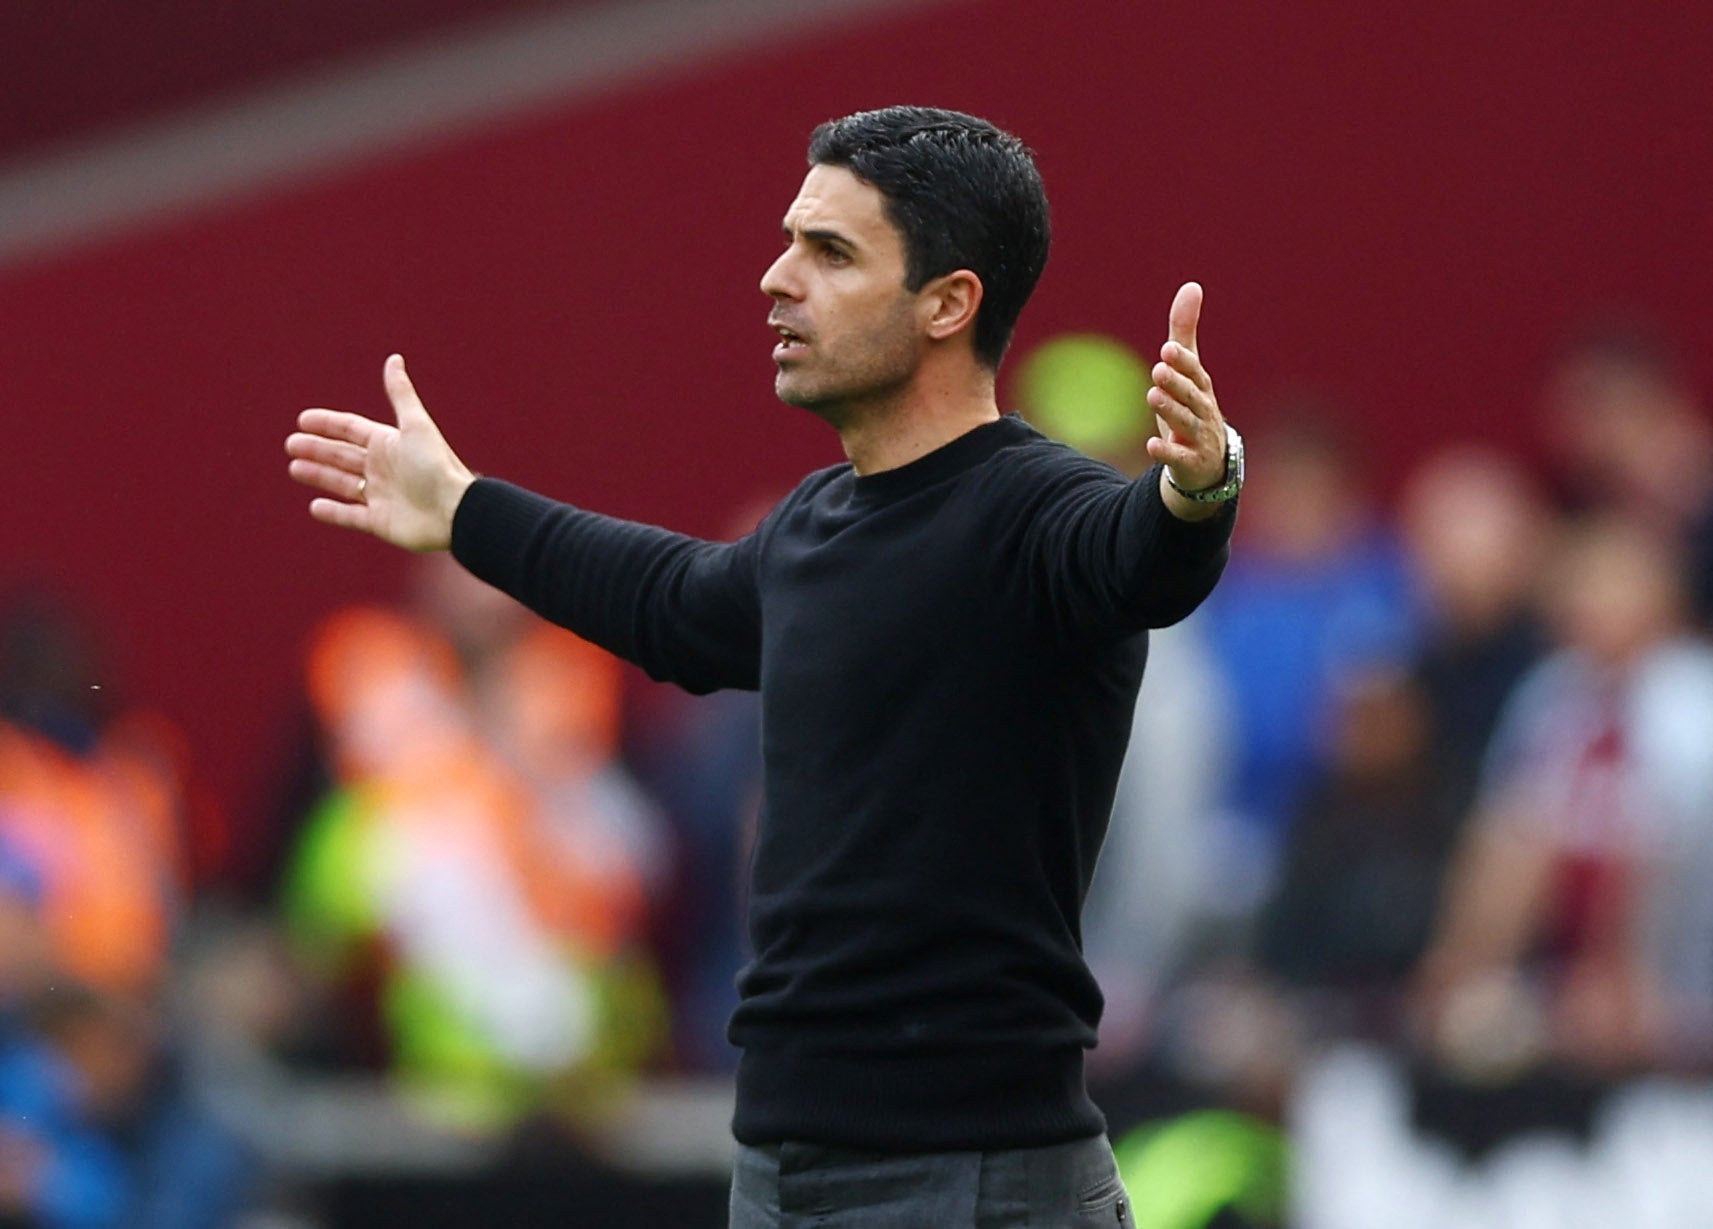 Mikel Arteta watches on as his side squandered a 2-0 lead against West Ham